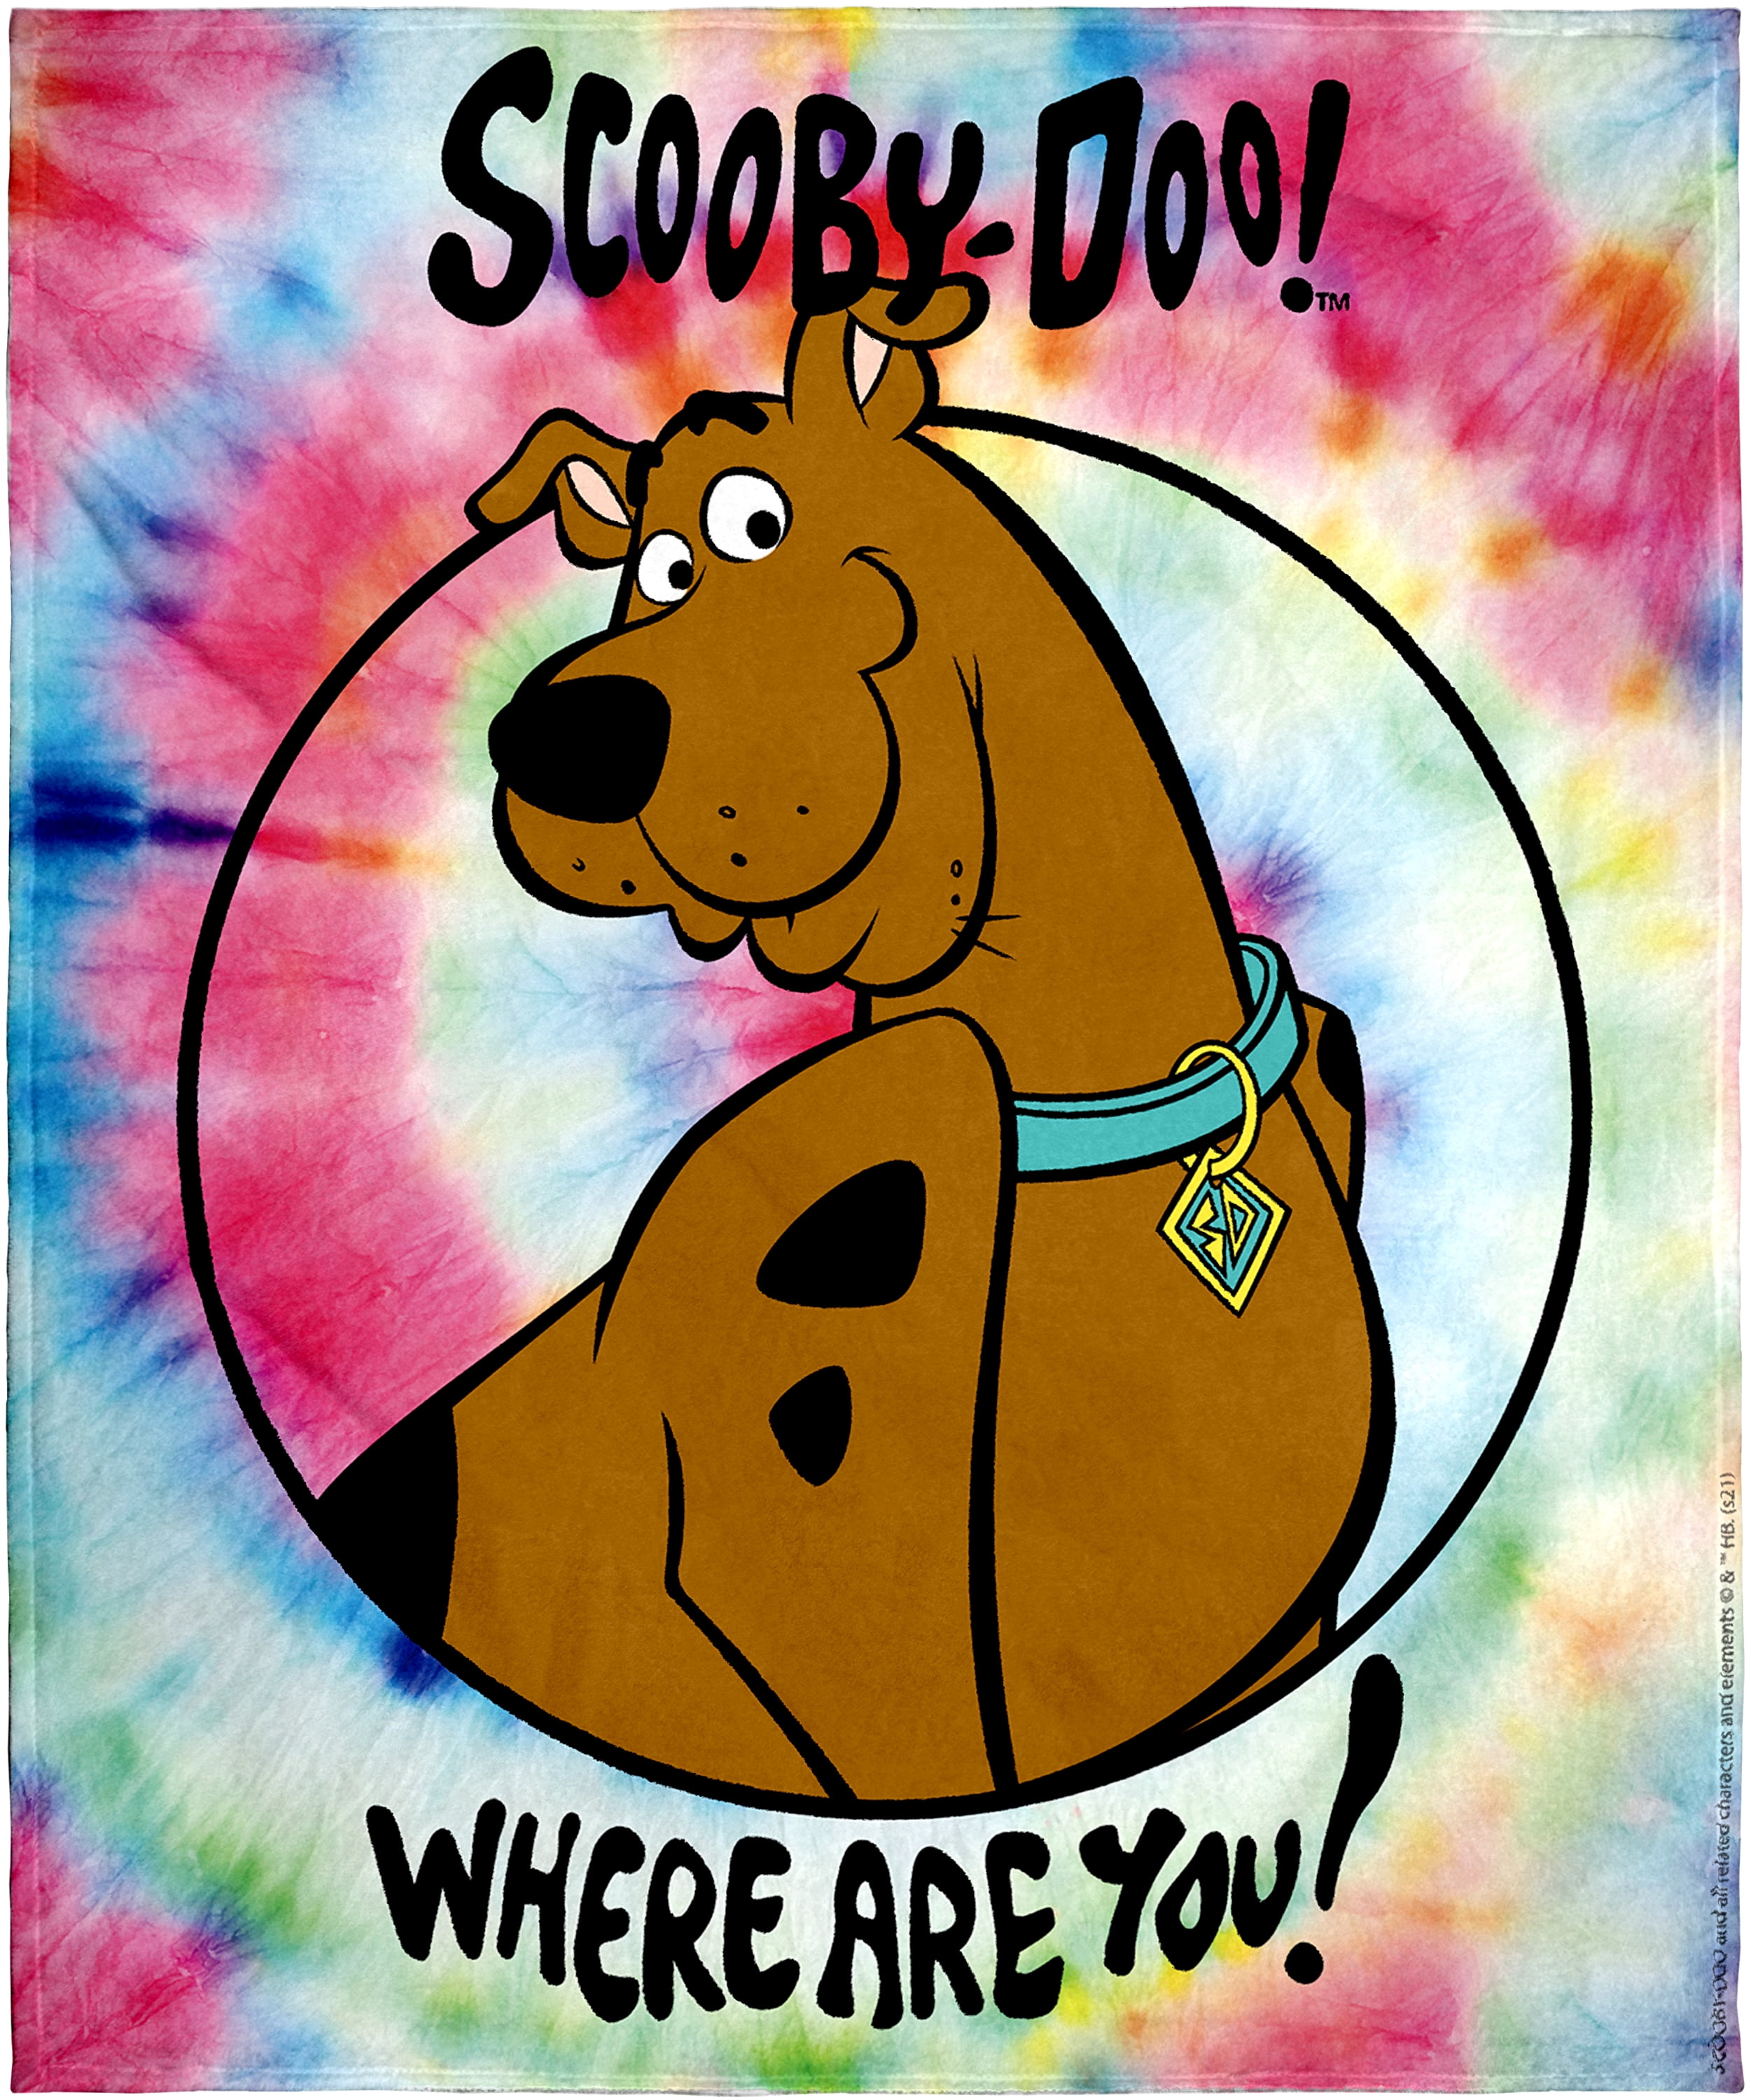 Scooby Doo Where Are You? Tie Dye Silk Touch Throw Blanket - Walmart.com